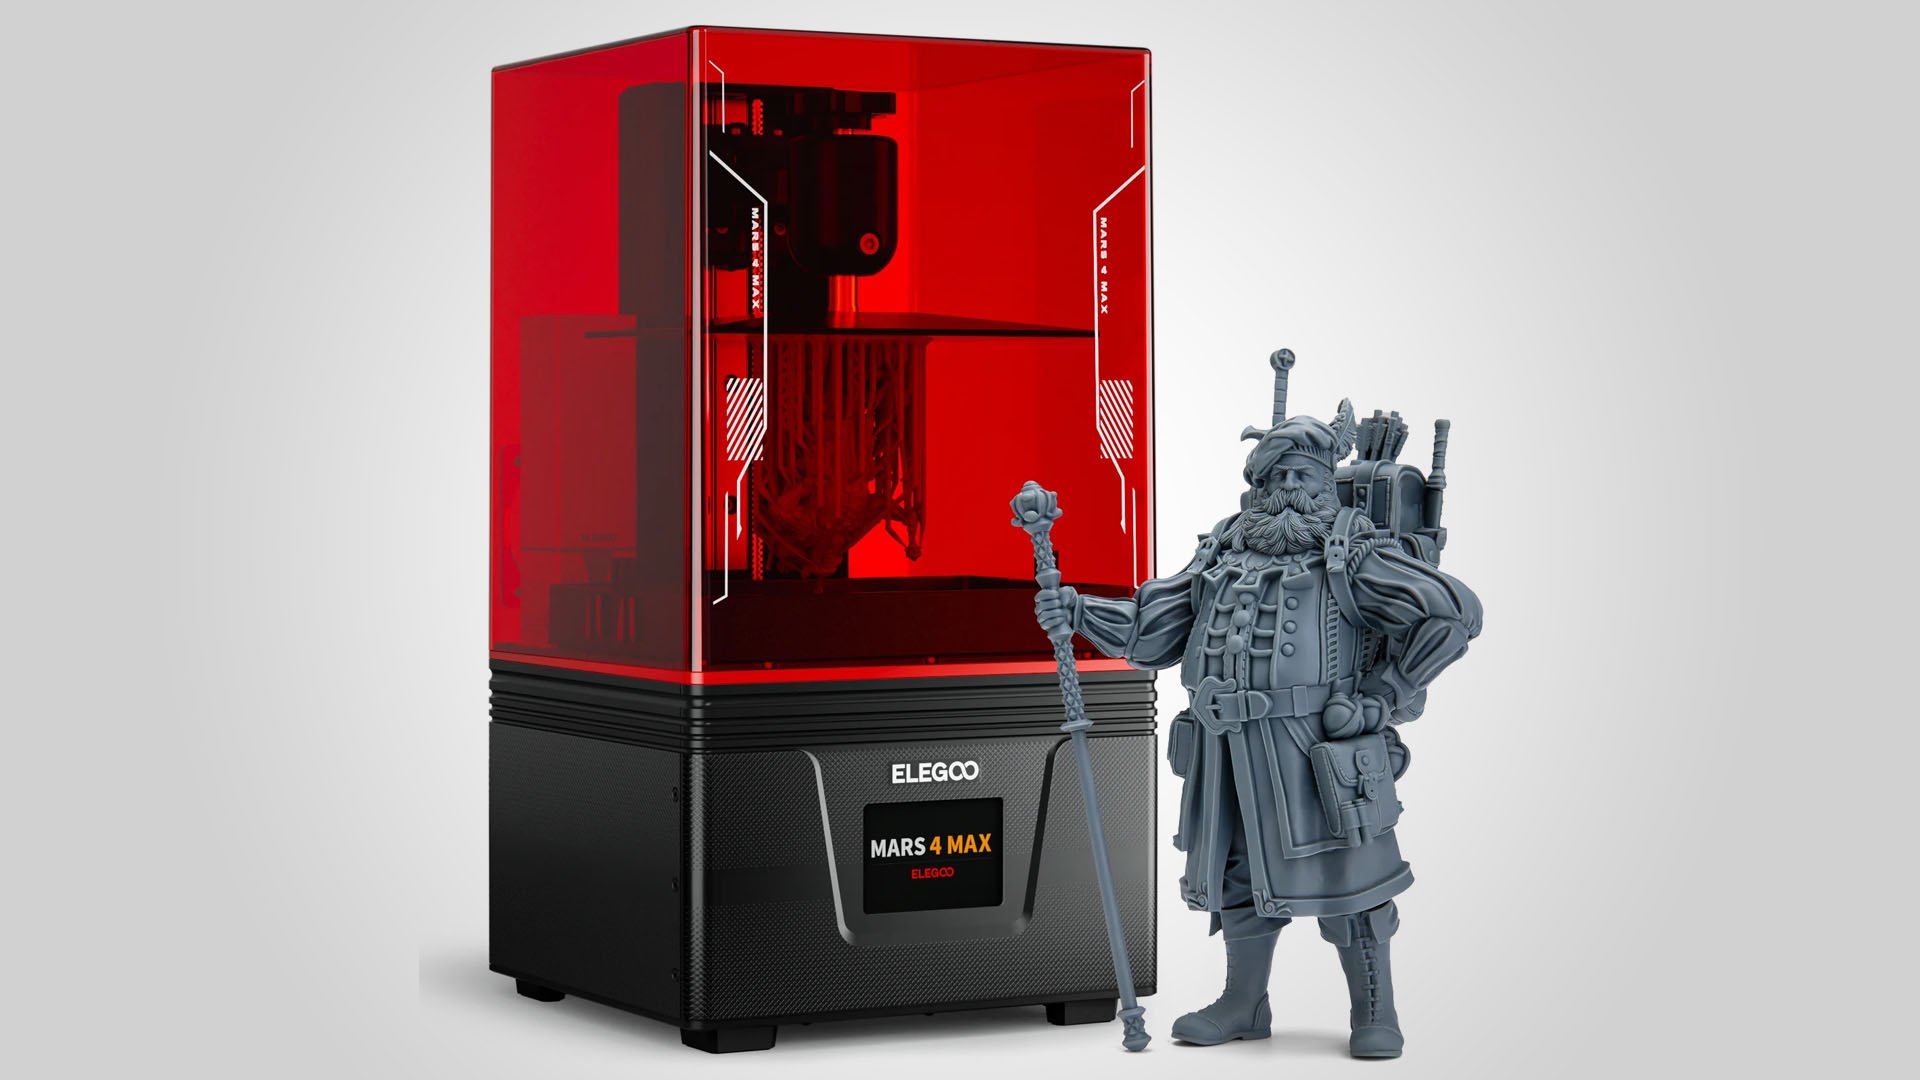 Elegoo Launches Mars 4 Max, Which is Not a DLP 3D Printer